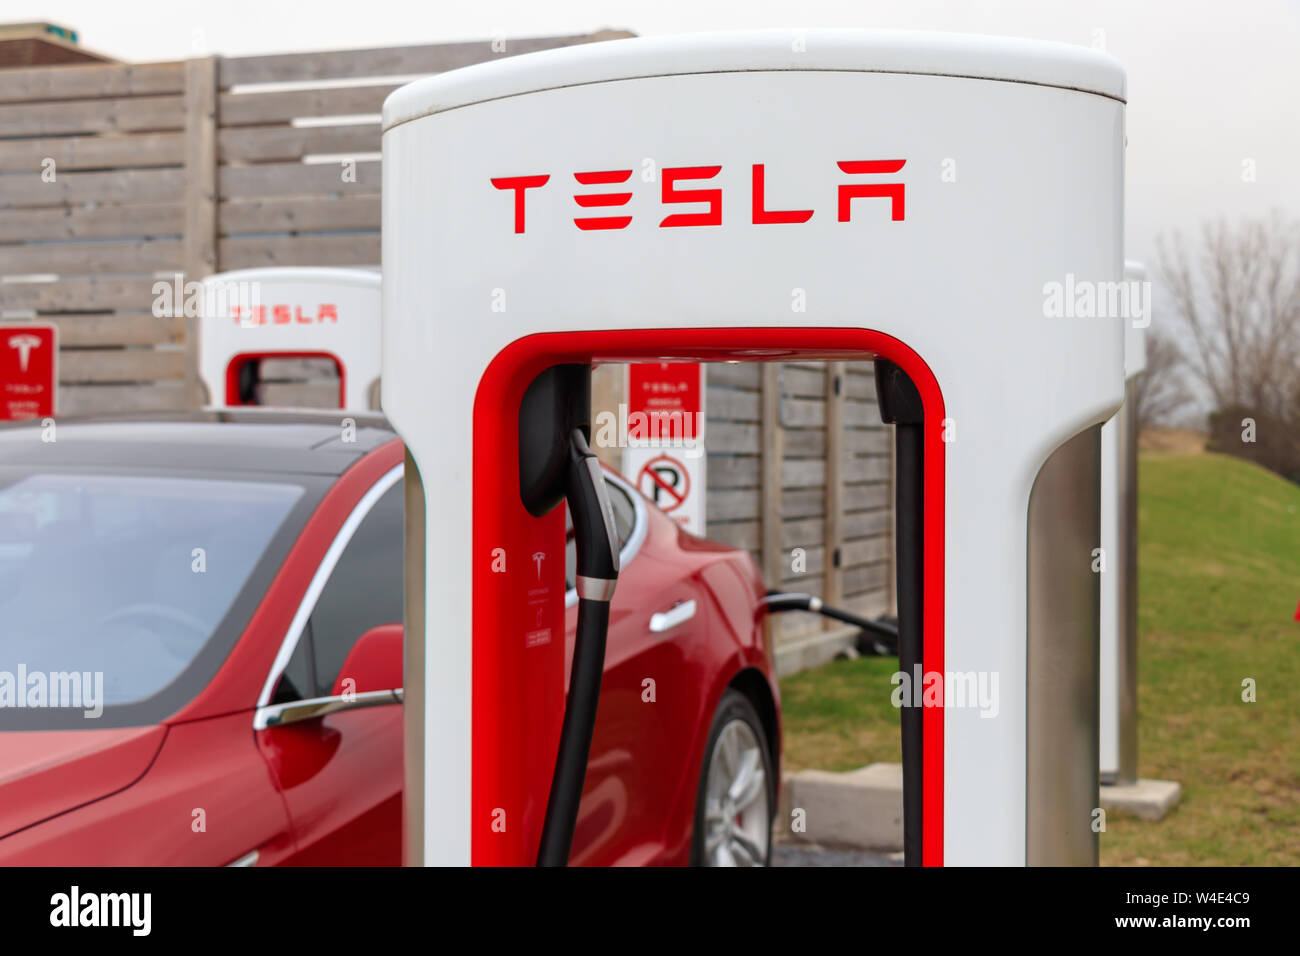 Tesla Supercharger Stall with Tesla Model S charging in background. Stock Photo